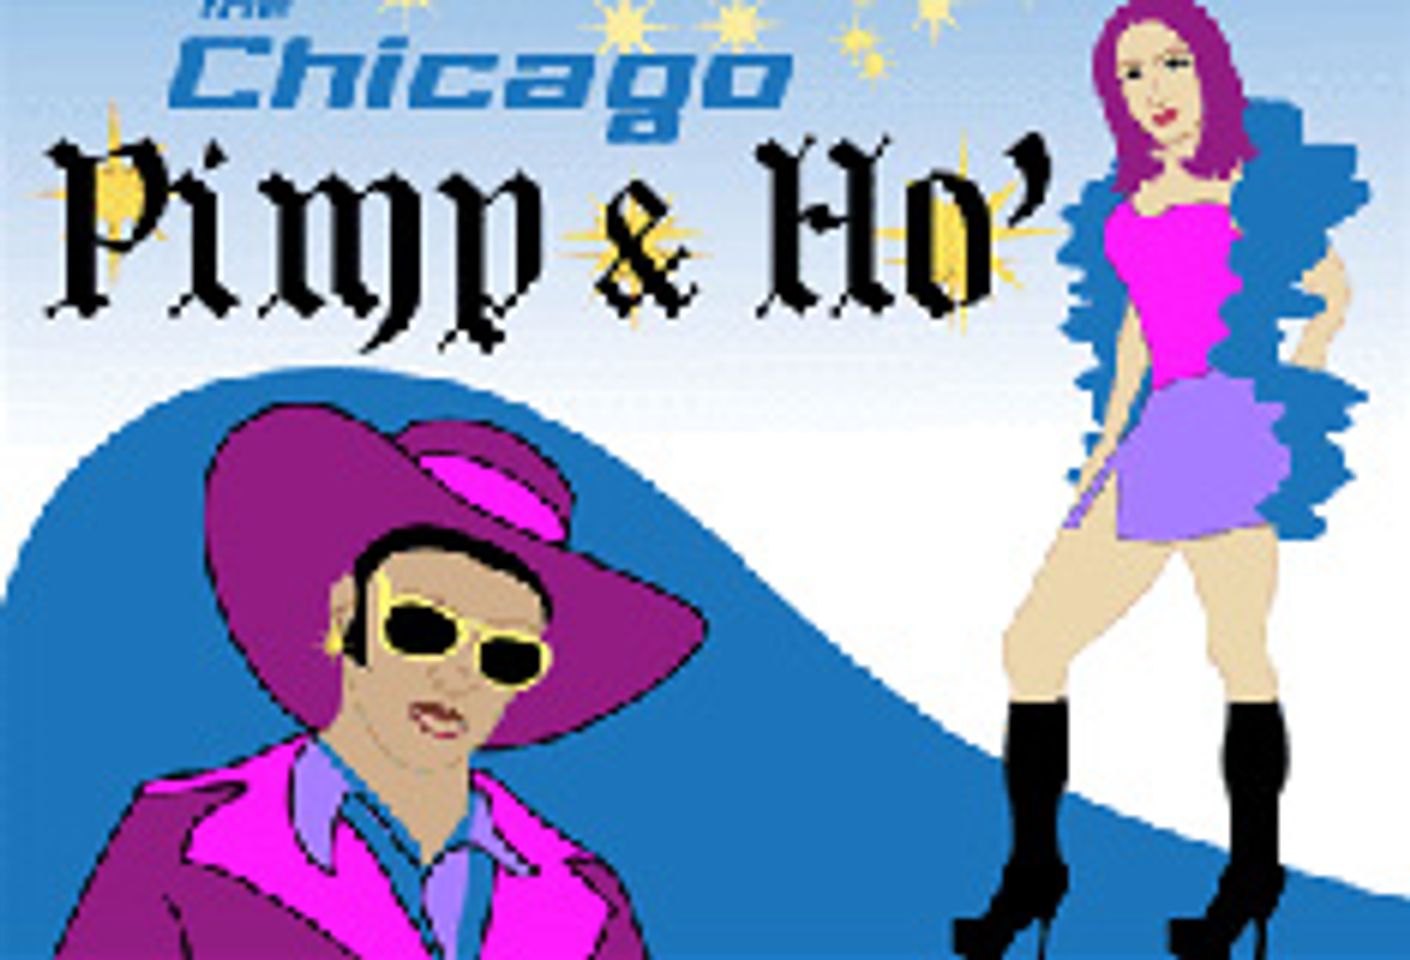 Seymore Butts and Shane to Co-Host Pimp & Ho Ball in Chicago